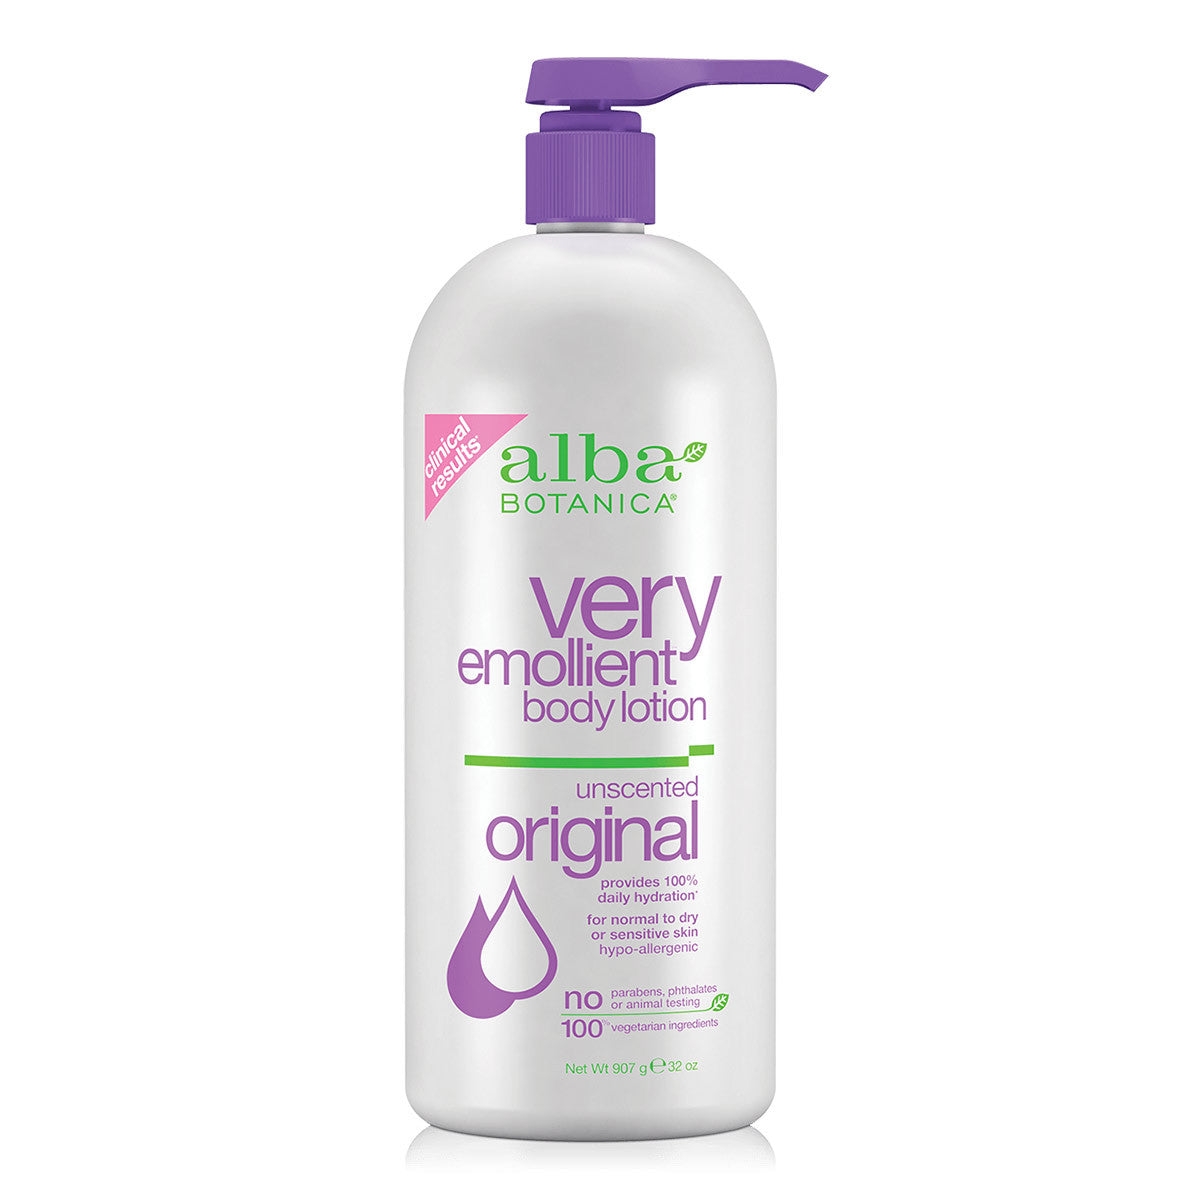 Primary image of Very Emollient Original Unscented Body Lotion